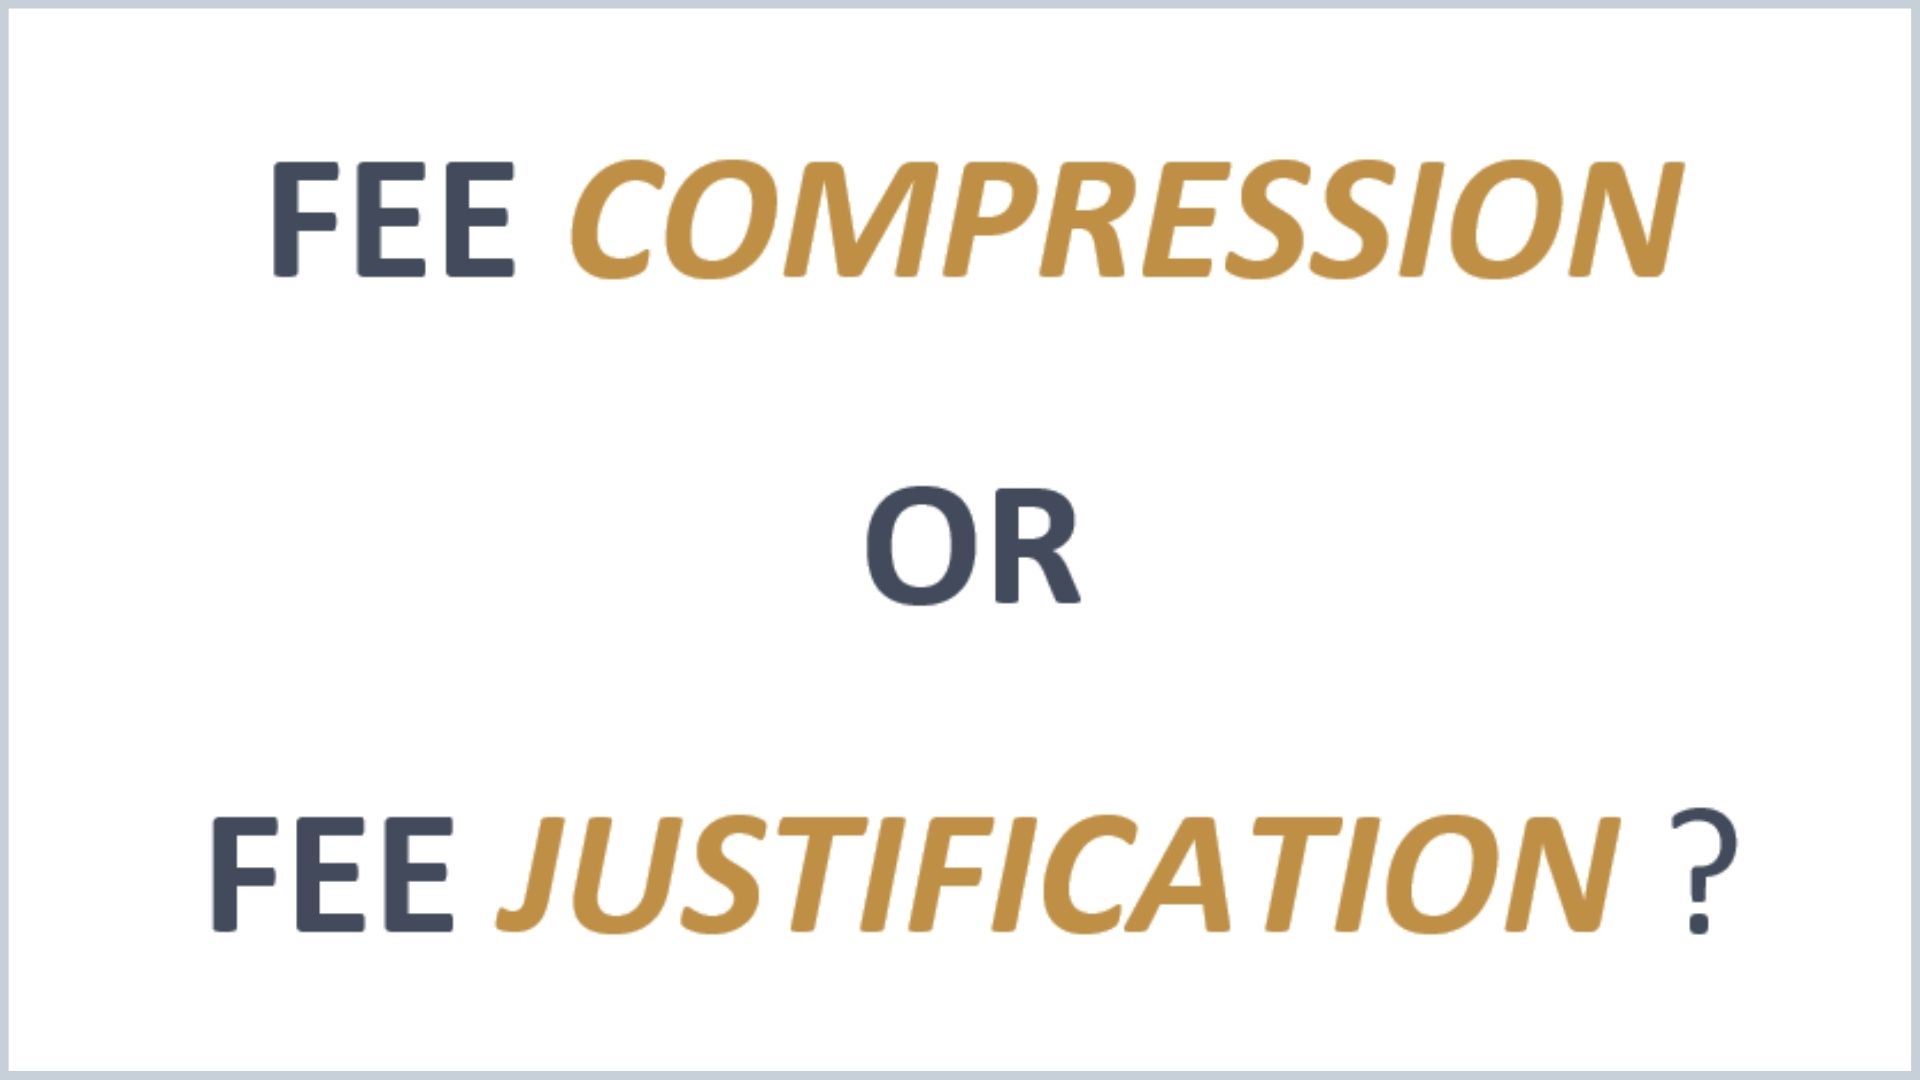 Fee “Compression” or  Fee “Justification?”